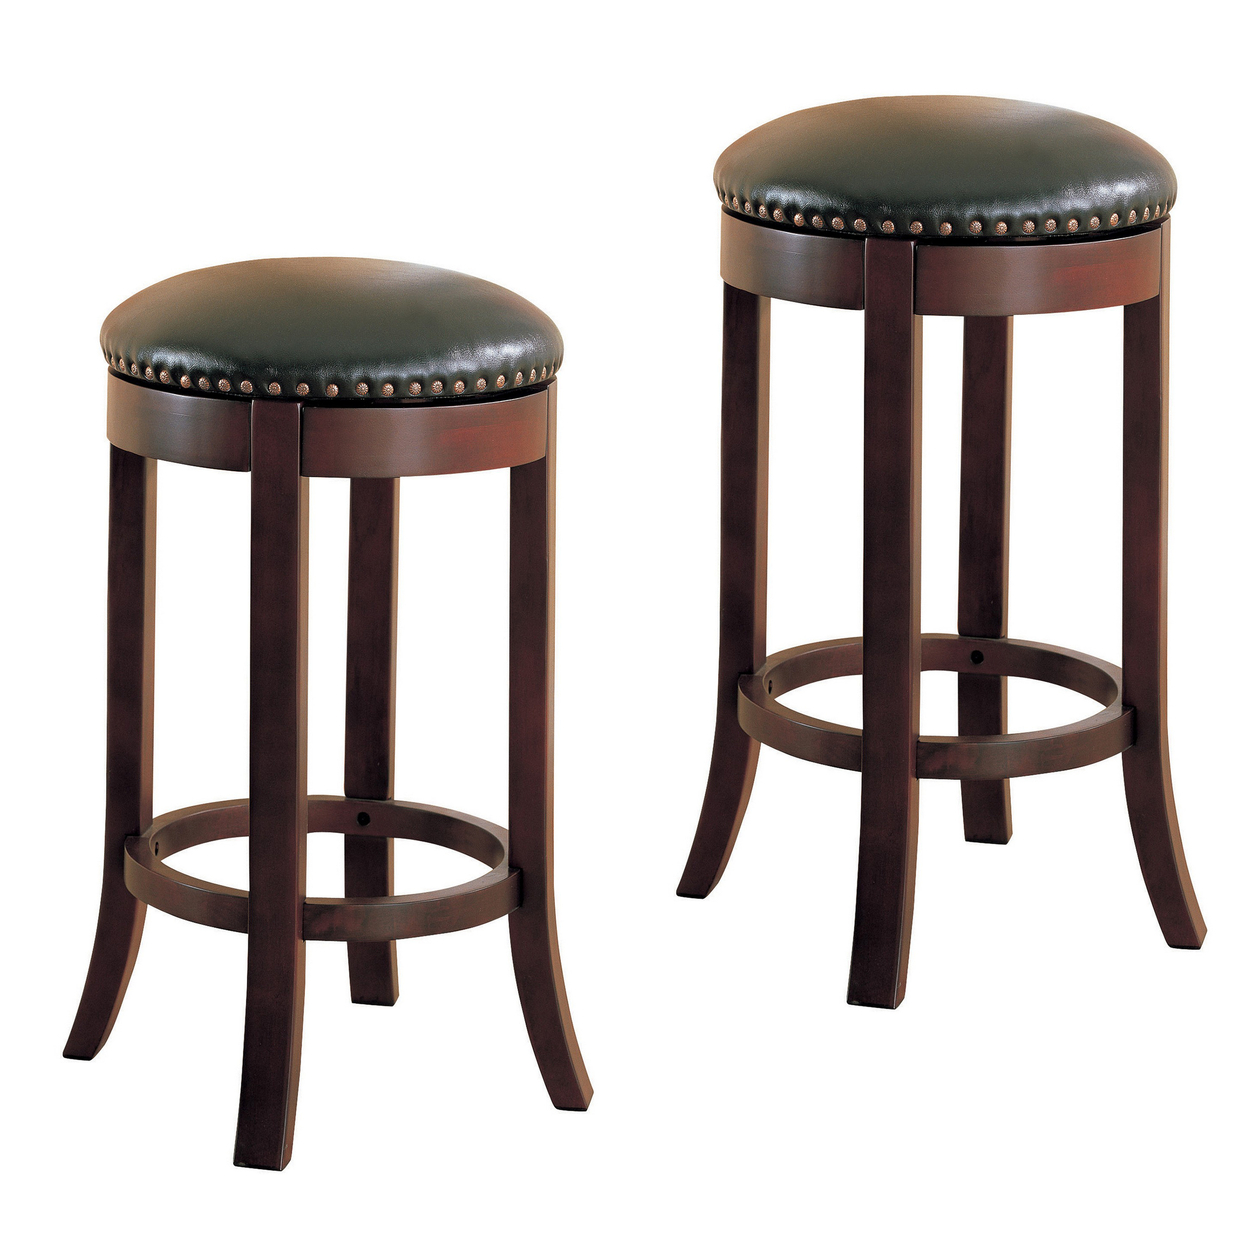 Contemporary 29 Swivel Bar Stool With Upholstered Seat, Brown ,Set Of 2- Saltoro Sherpi